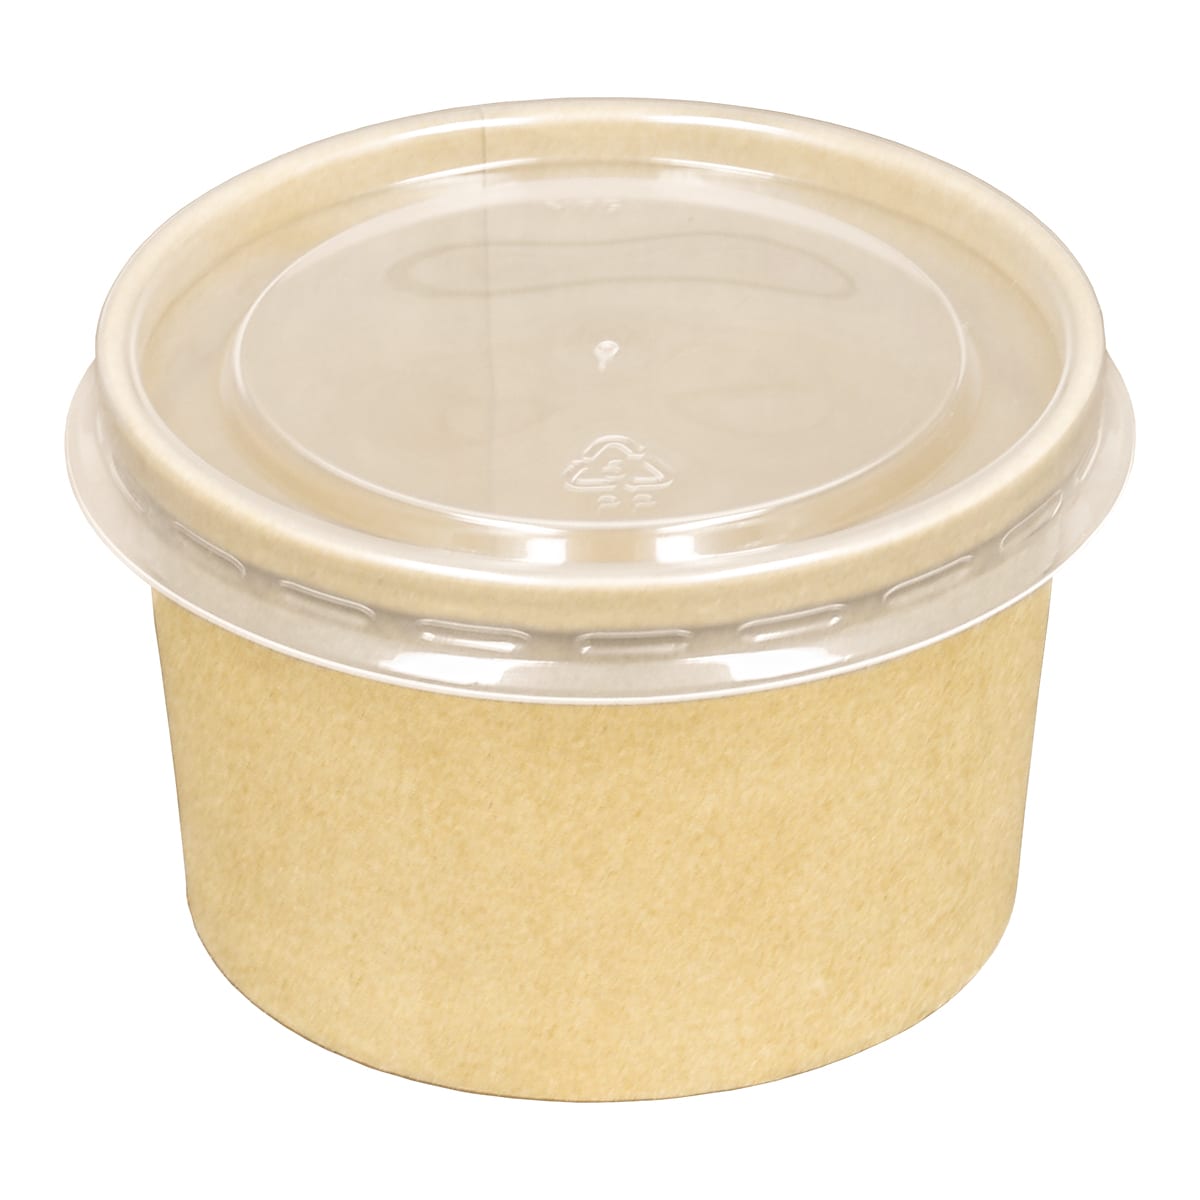 SMALL POLY PRO LID FITS 16
OZ KRAFT PAPER SOUP
CONTAINERS  500/CS